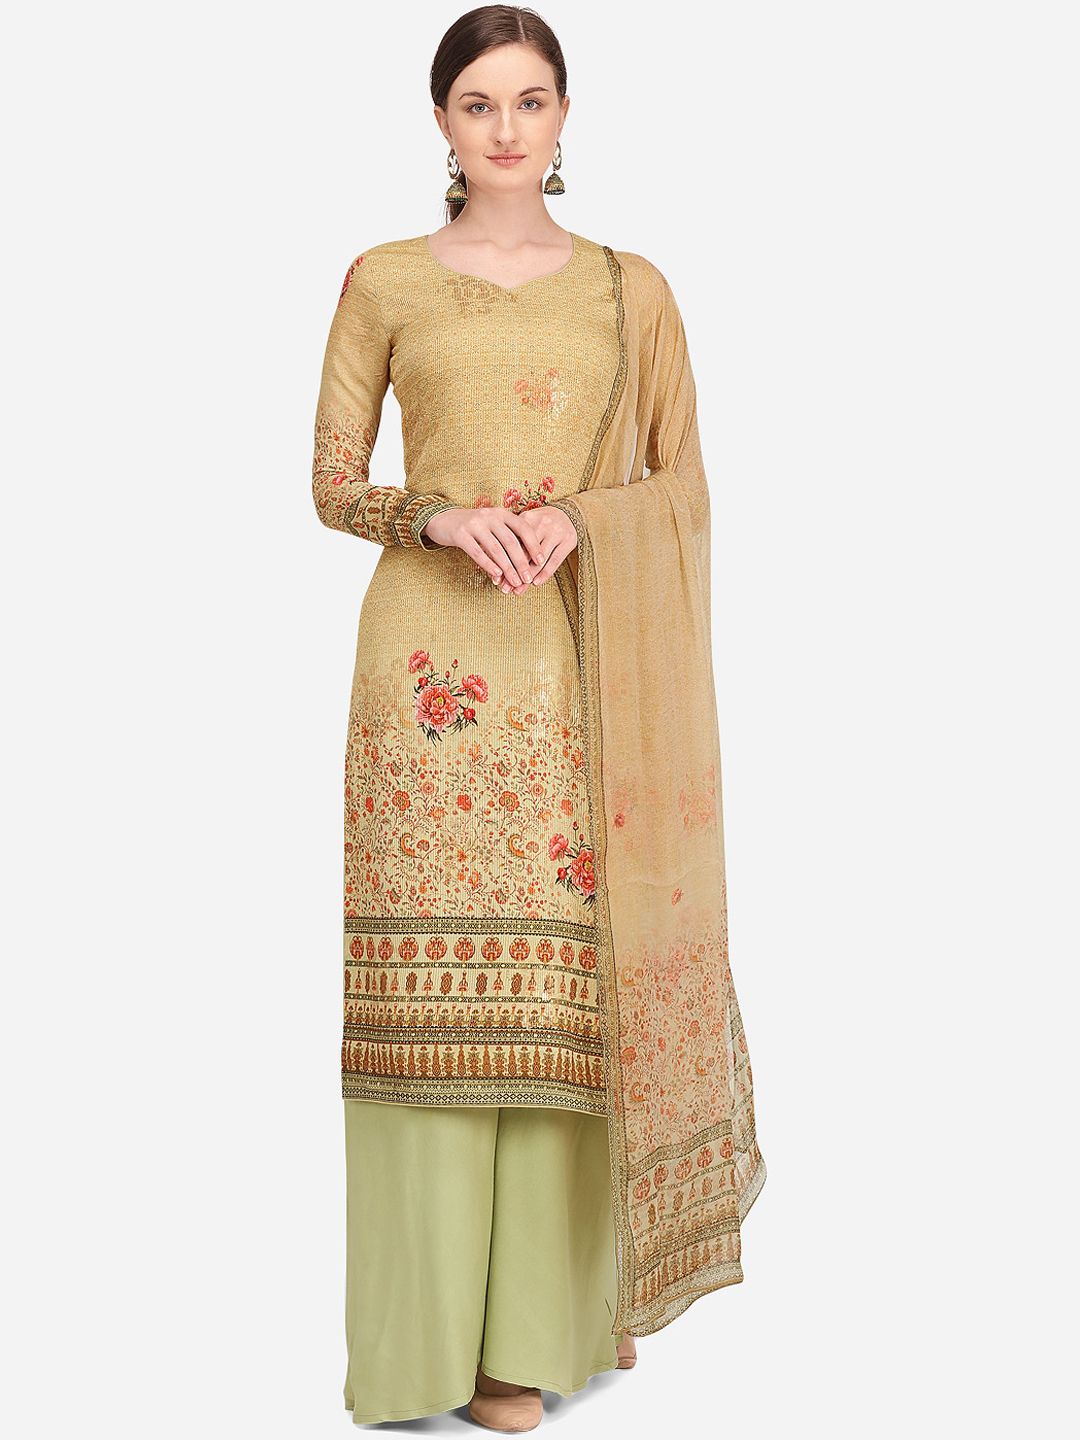 Stylee LIFESTYLE Women Beige & Green Printed Unstitched Dress Material Price in India